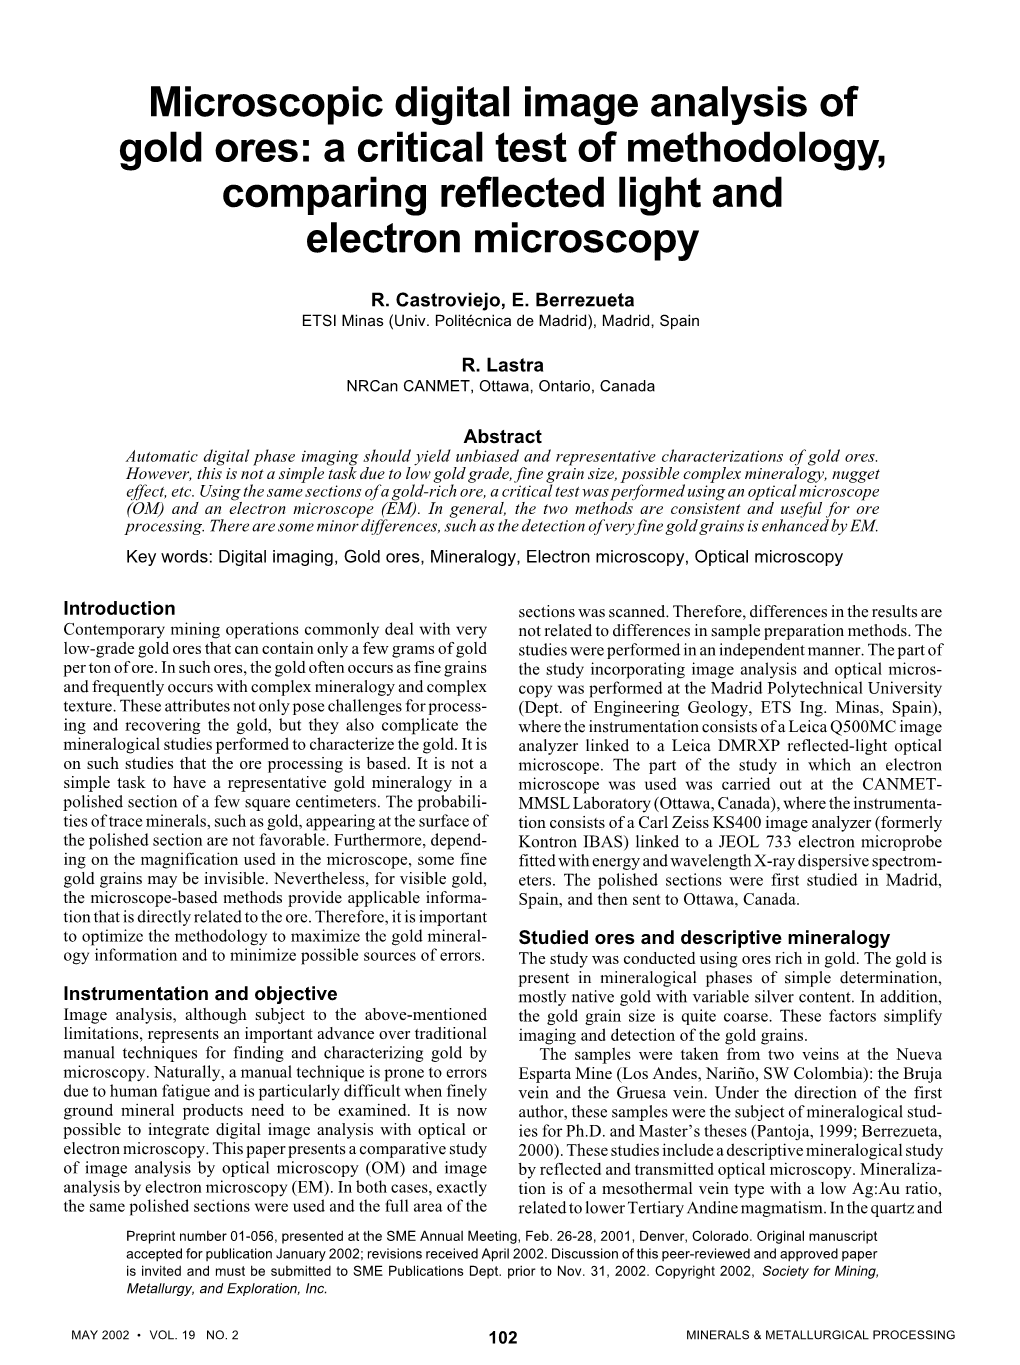 Microscopic Digital Image Analysis of Gold Ores: a Critical Test of Methodology, Comparing Reflected Light and Electron Microscopy